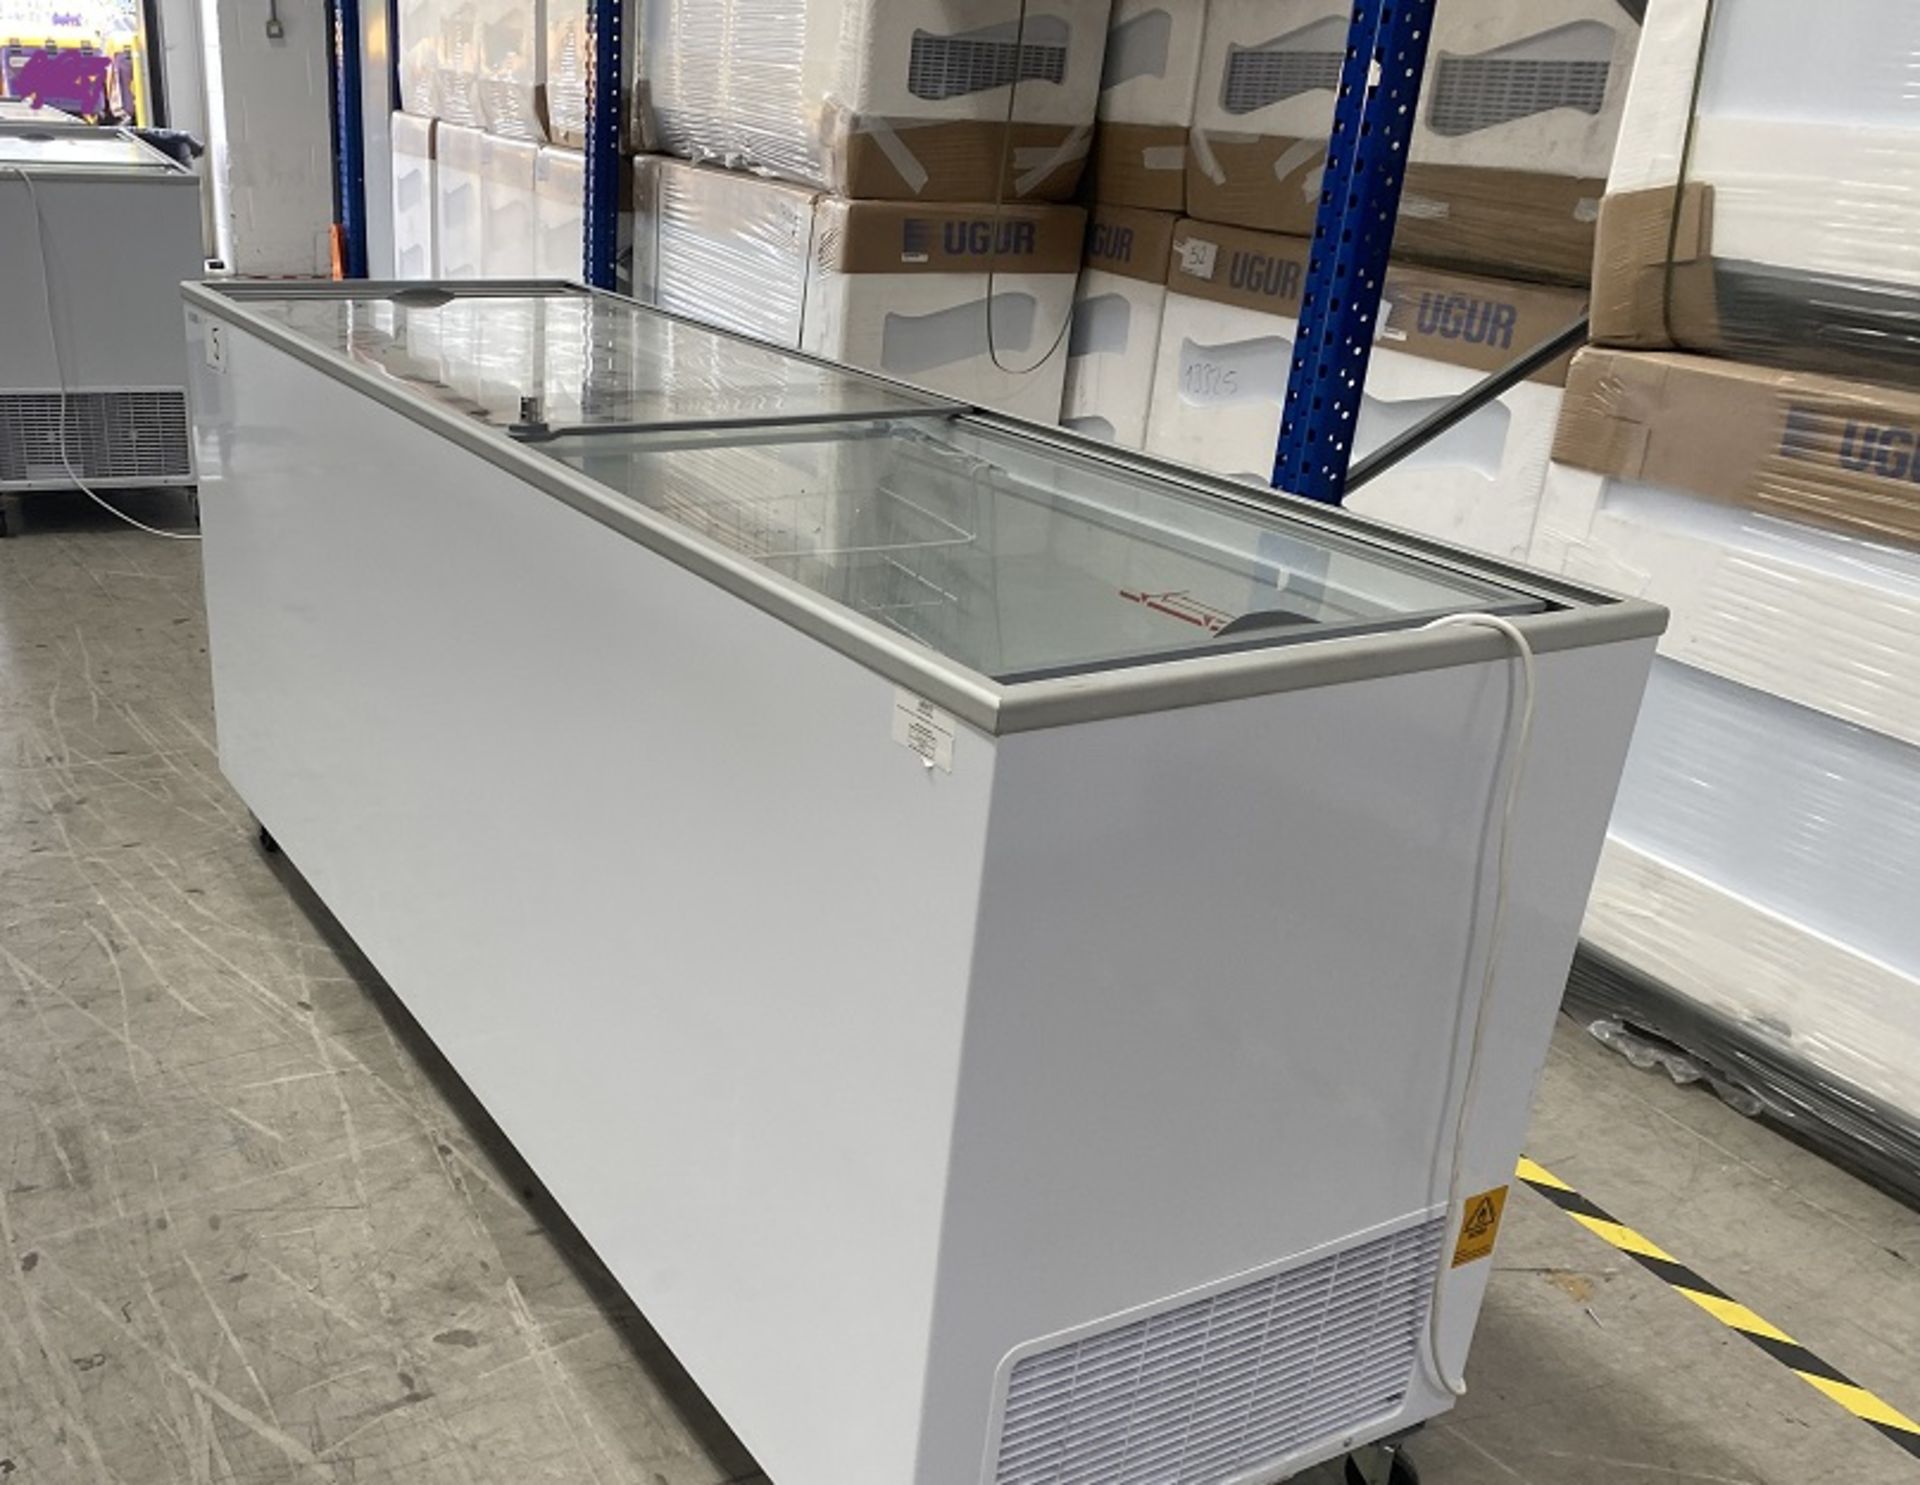 Ugur UDD 600 SC 2060mm x 635mm Commercial Chest Freezer, with glass sliding door top, 240VPlease - Image 2 of 4